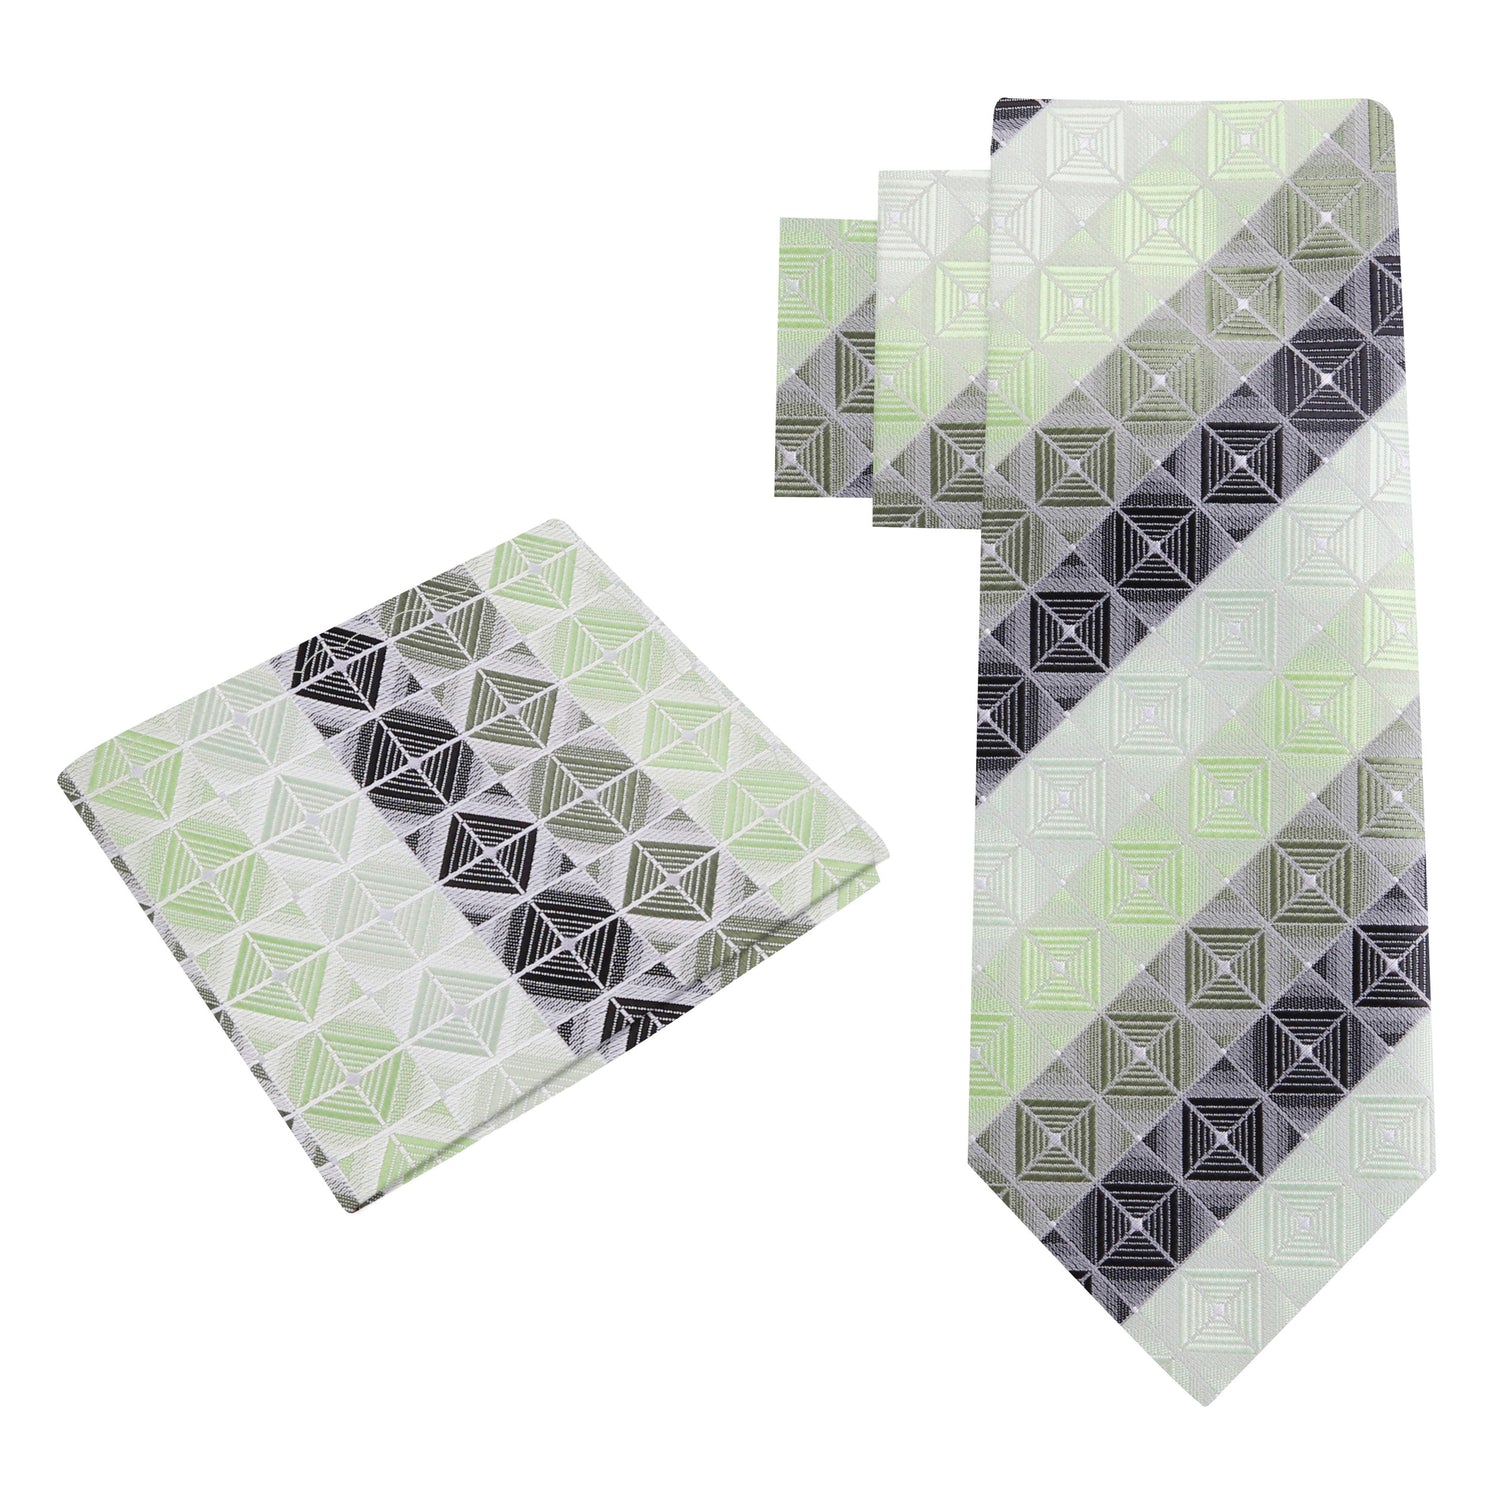 Alt View: Green Geometric Blocks Tie and Matching Square